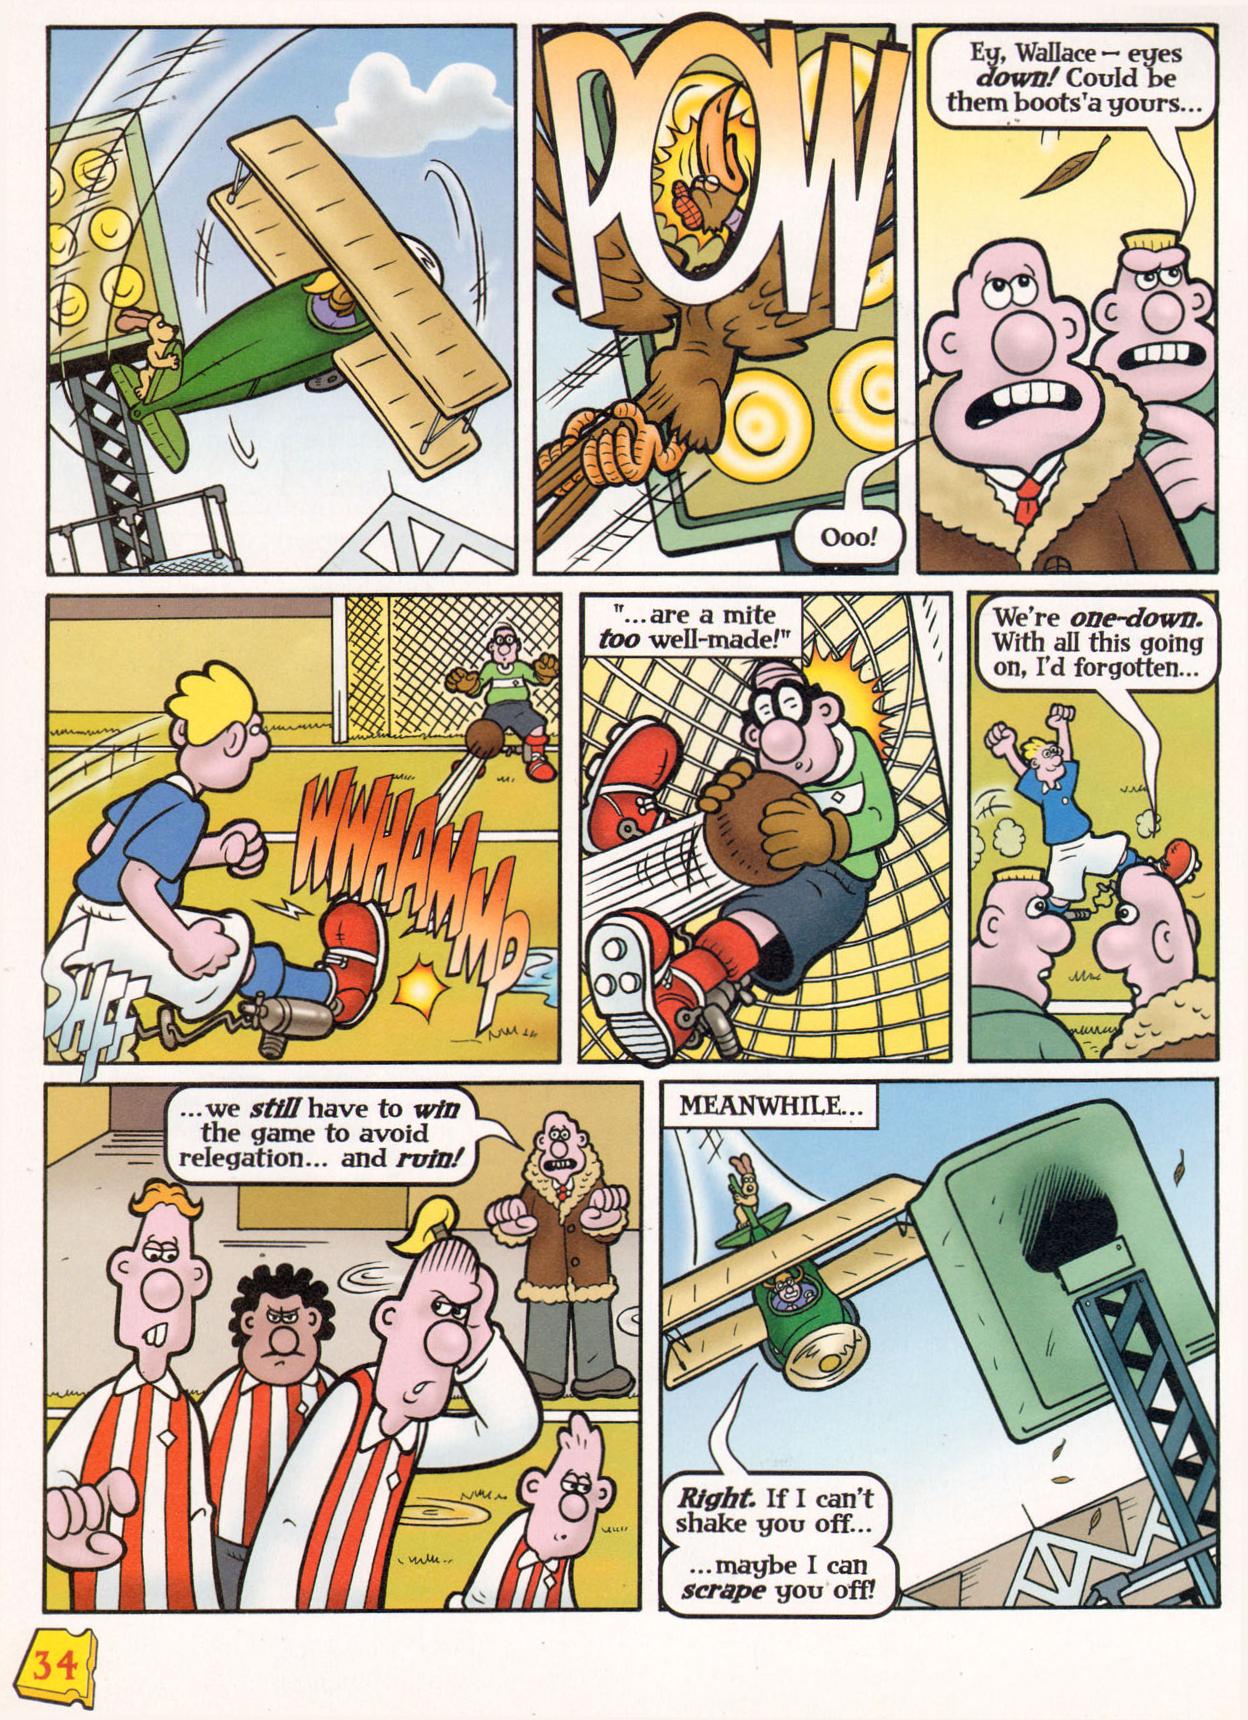 Read online Wallace & Gromit Comic comic -  Issue #12 - 32